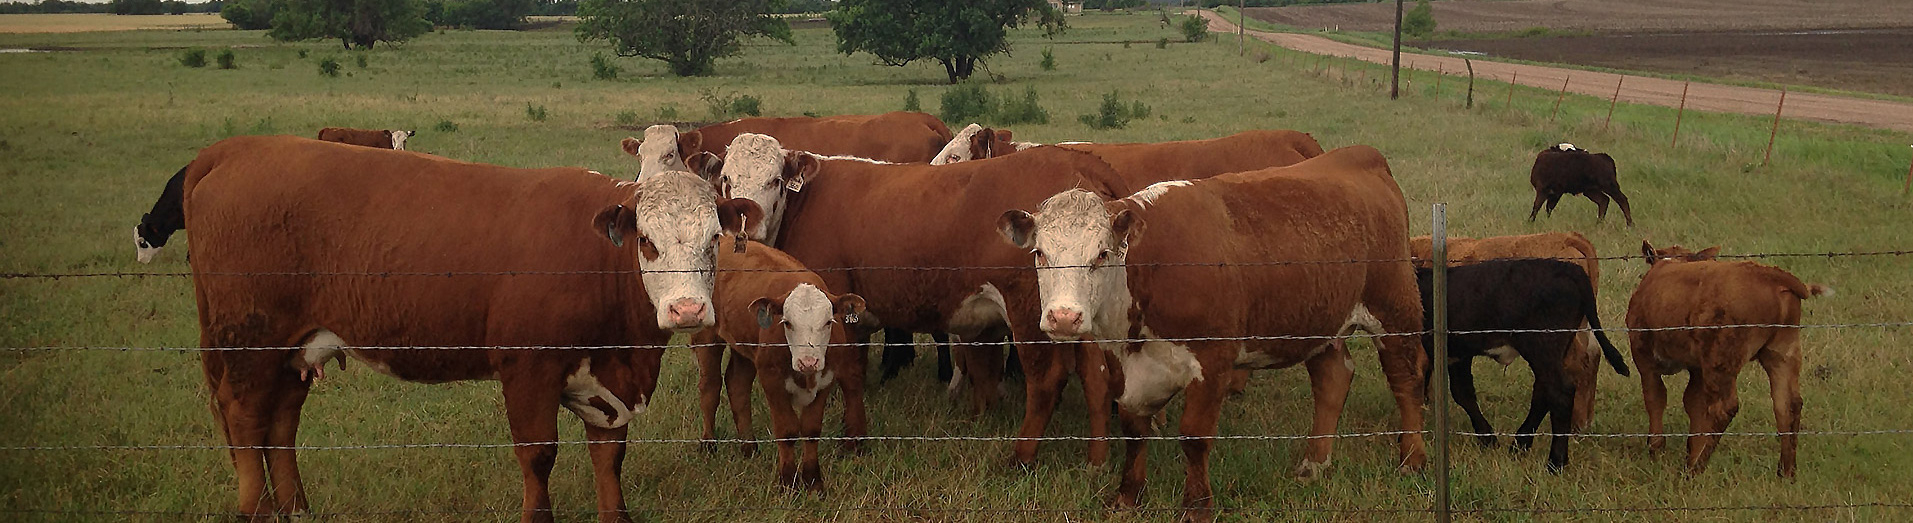 Image of brown cows on a farm